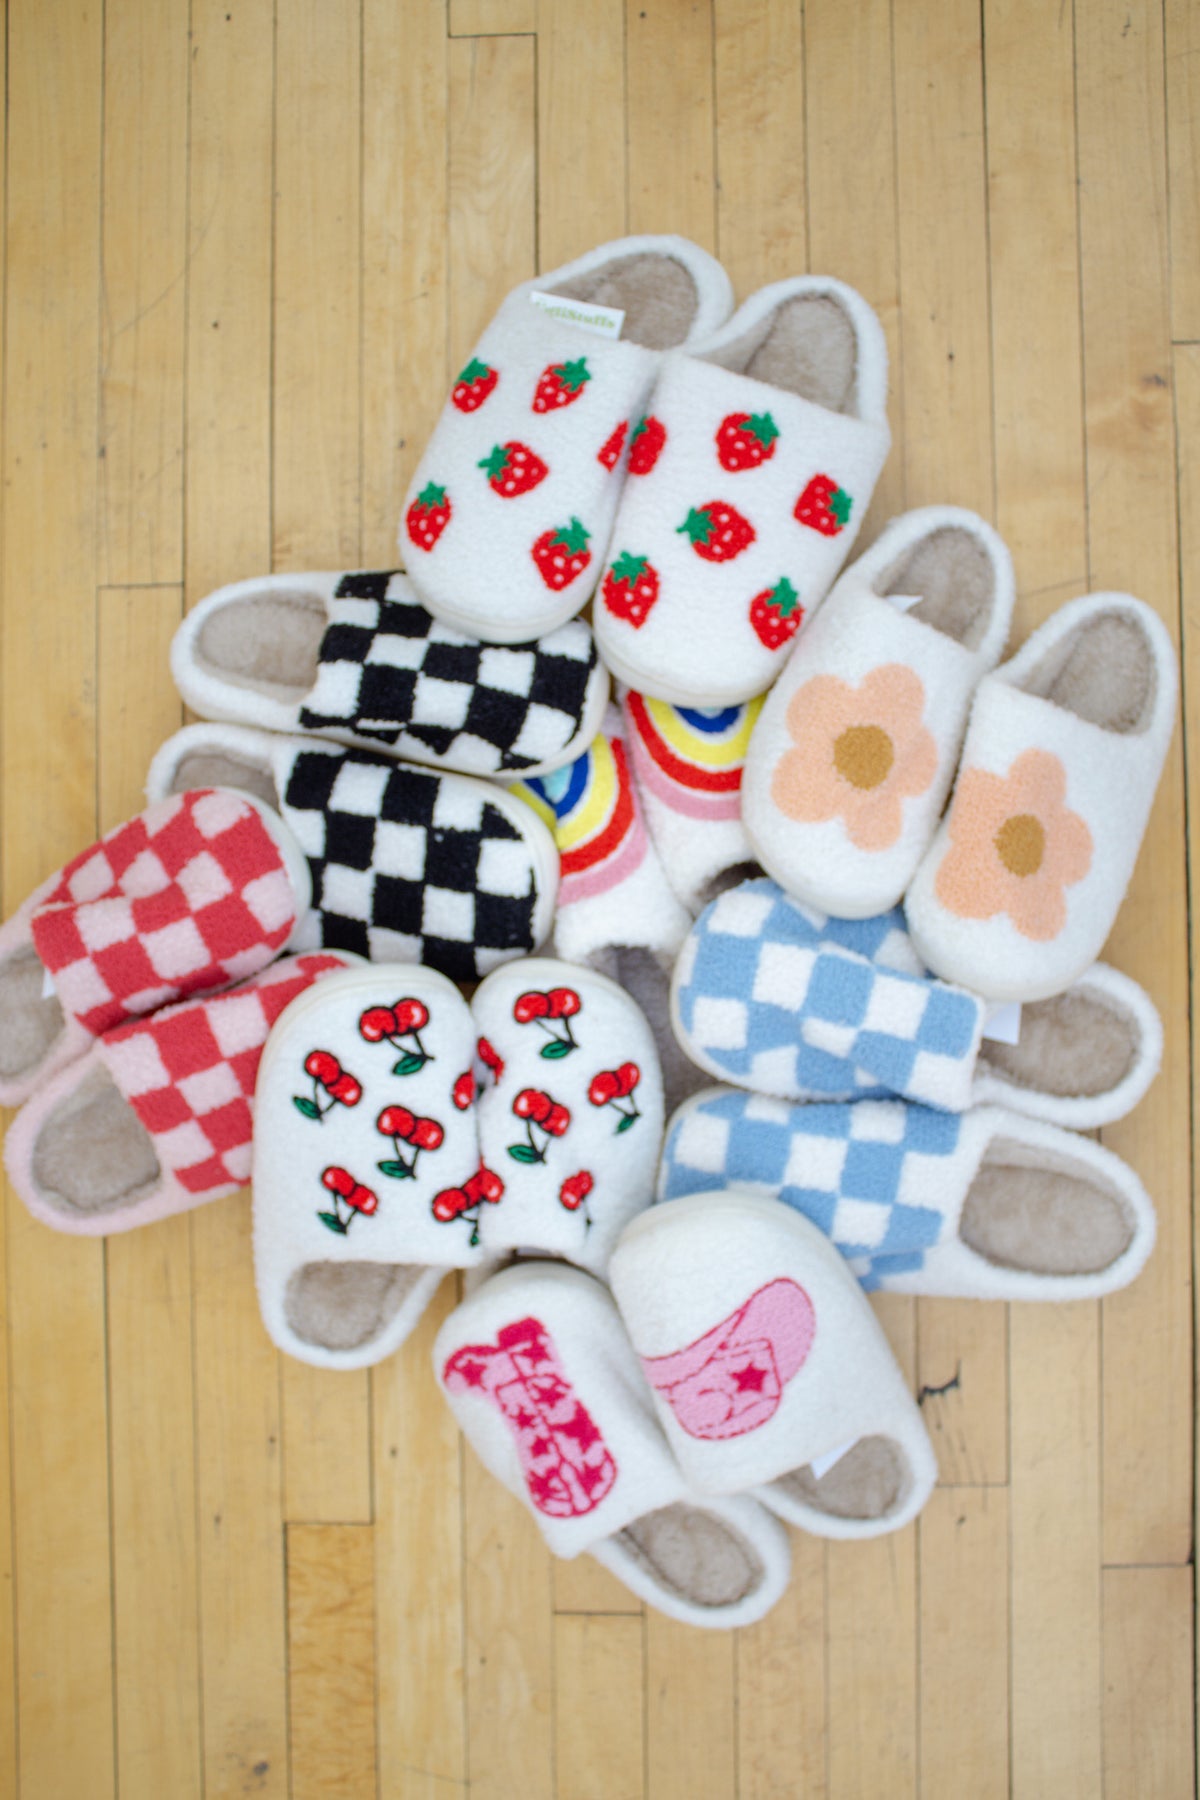 Strawberry Fields Slippers | Tufted Slippers